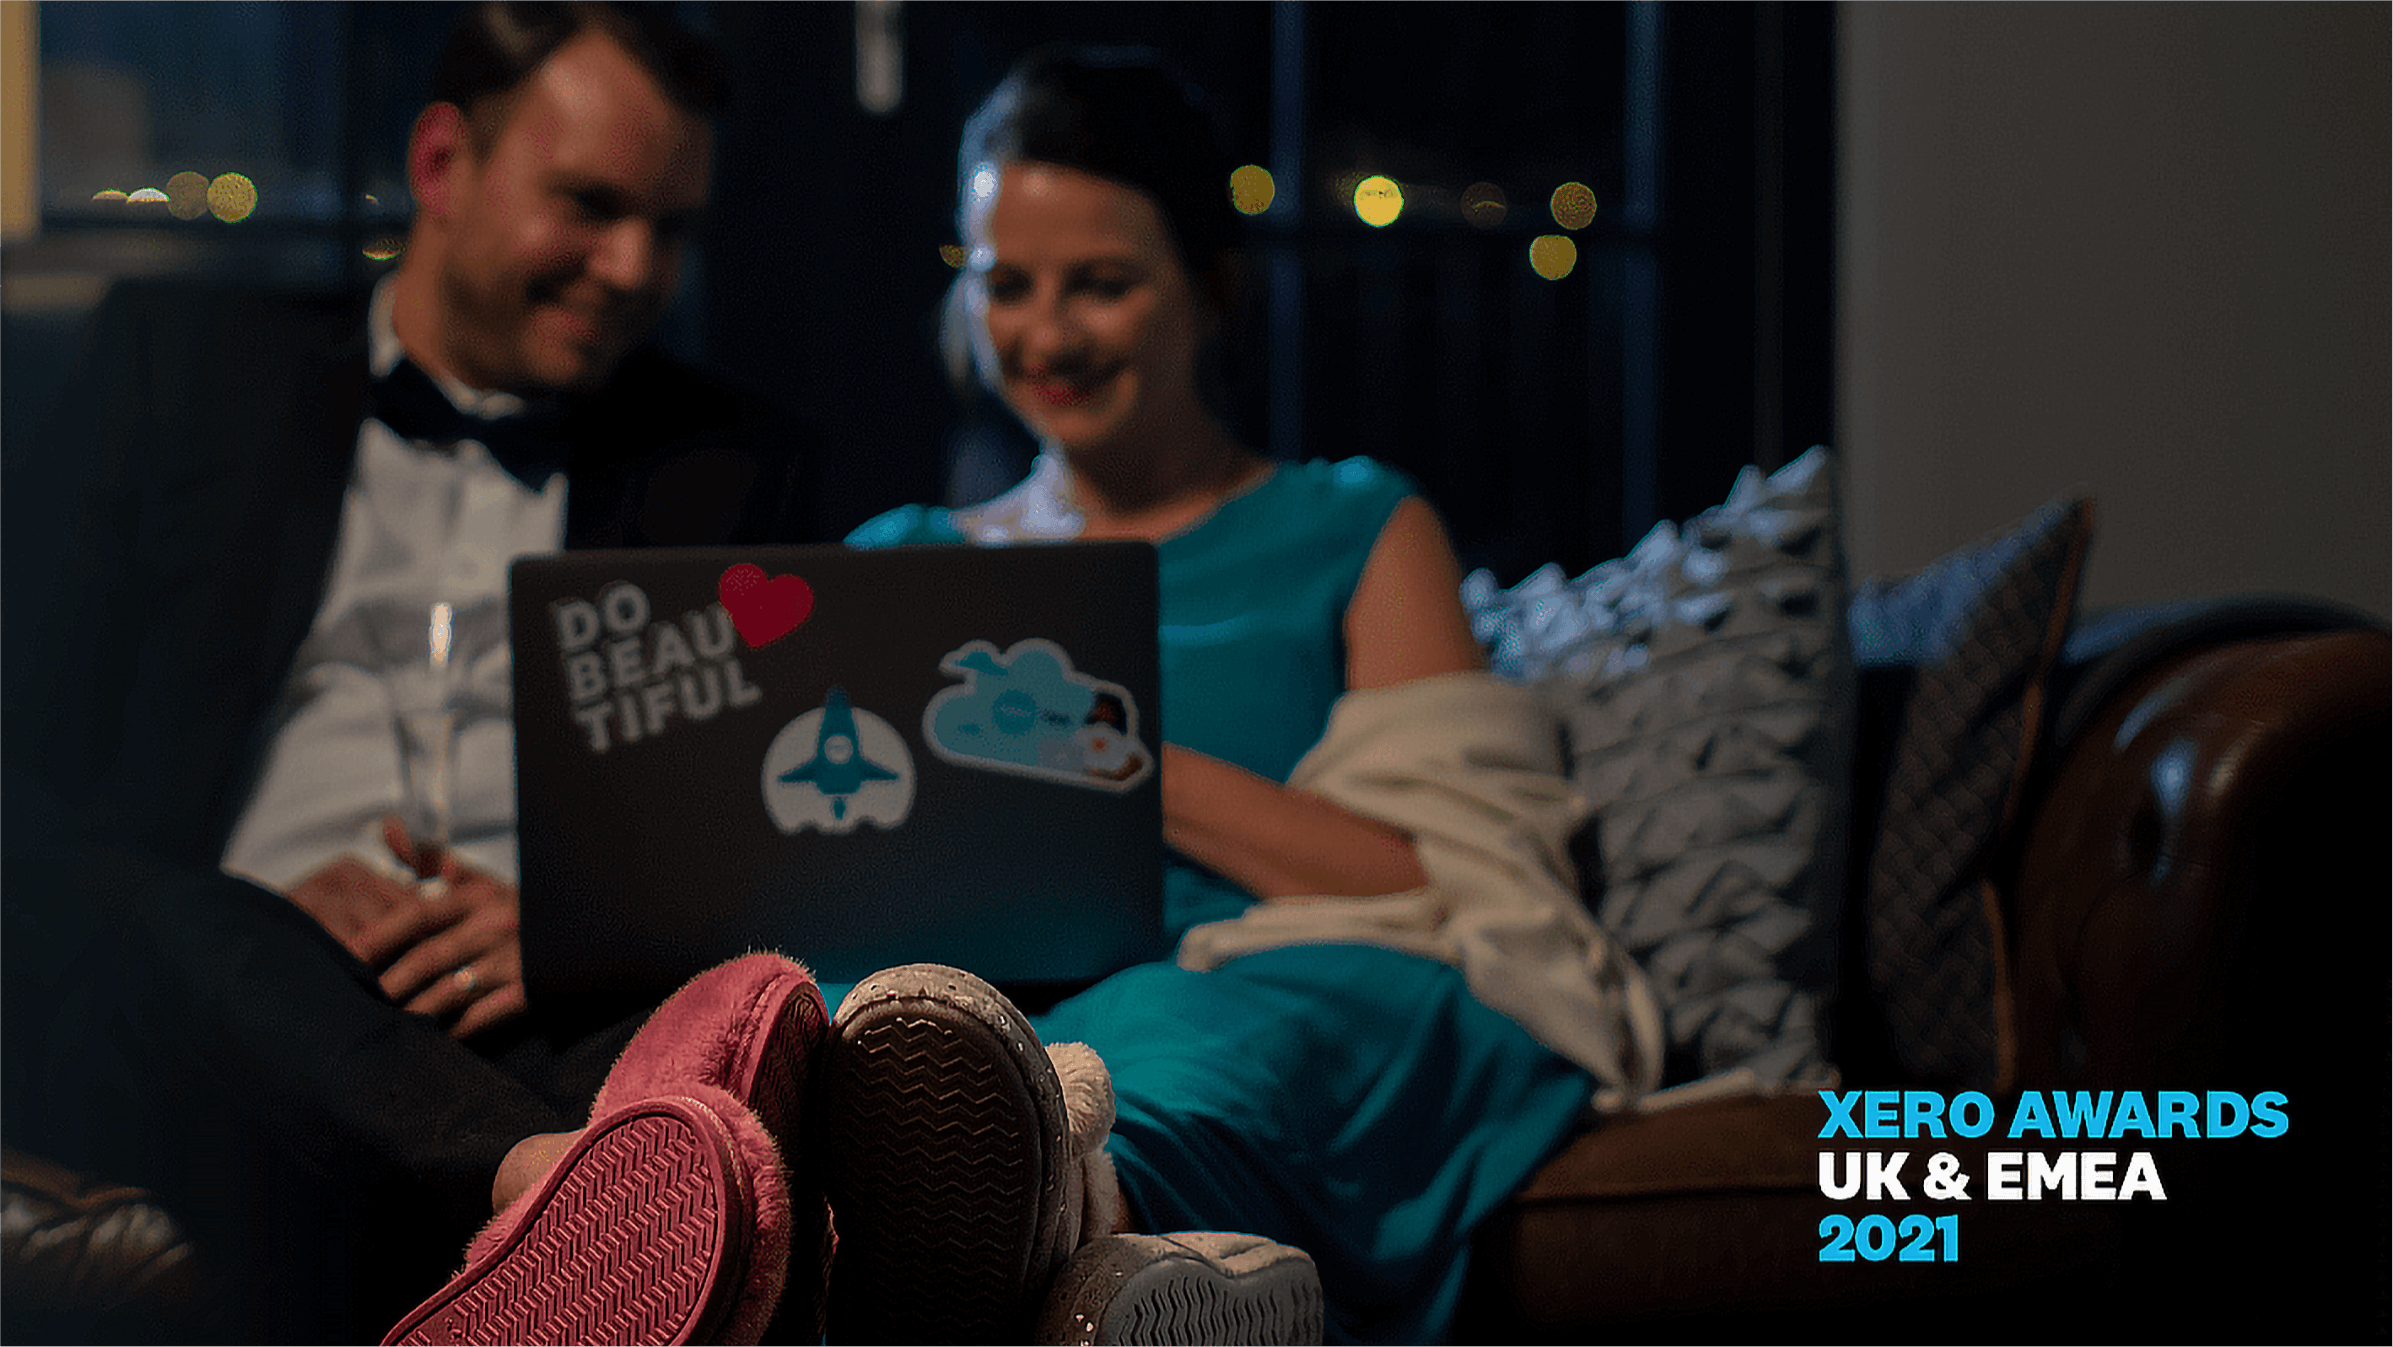 A man and woman in evening dress watch the Xero Awards online from the comfort of their sofa.